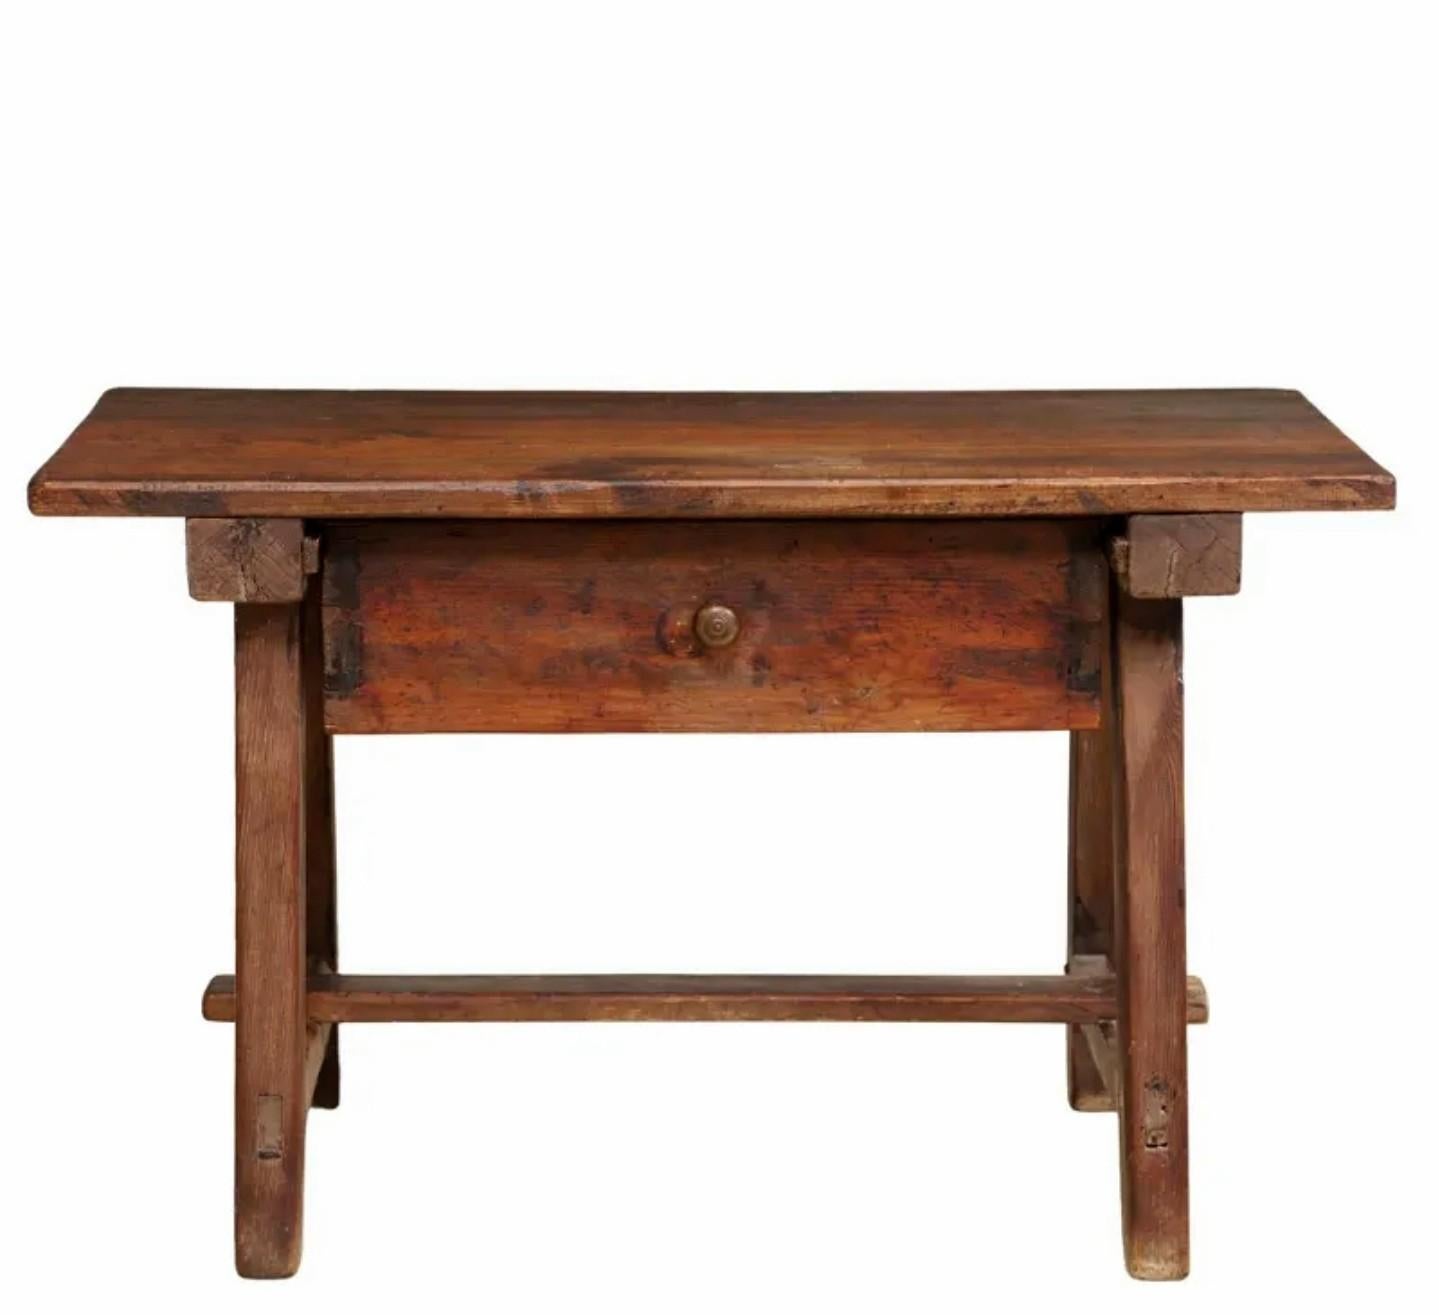 18th Century Rustic Antique Spanish Colonial Baroque Style Work Table